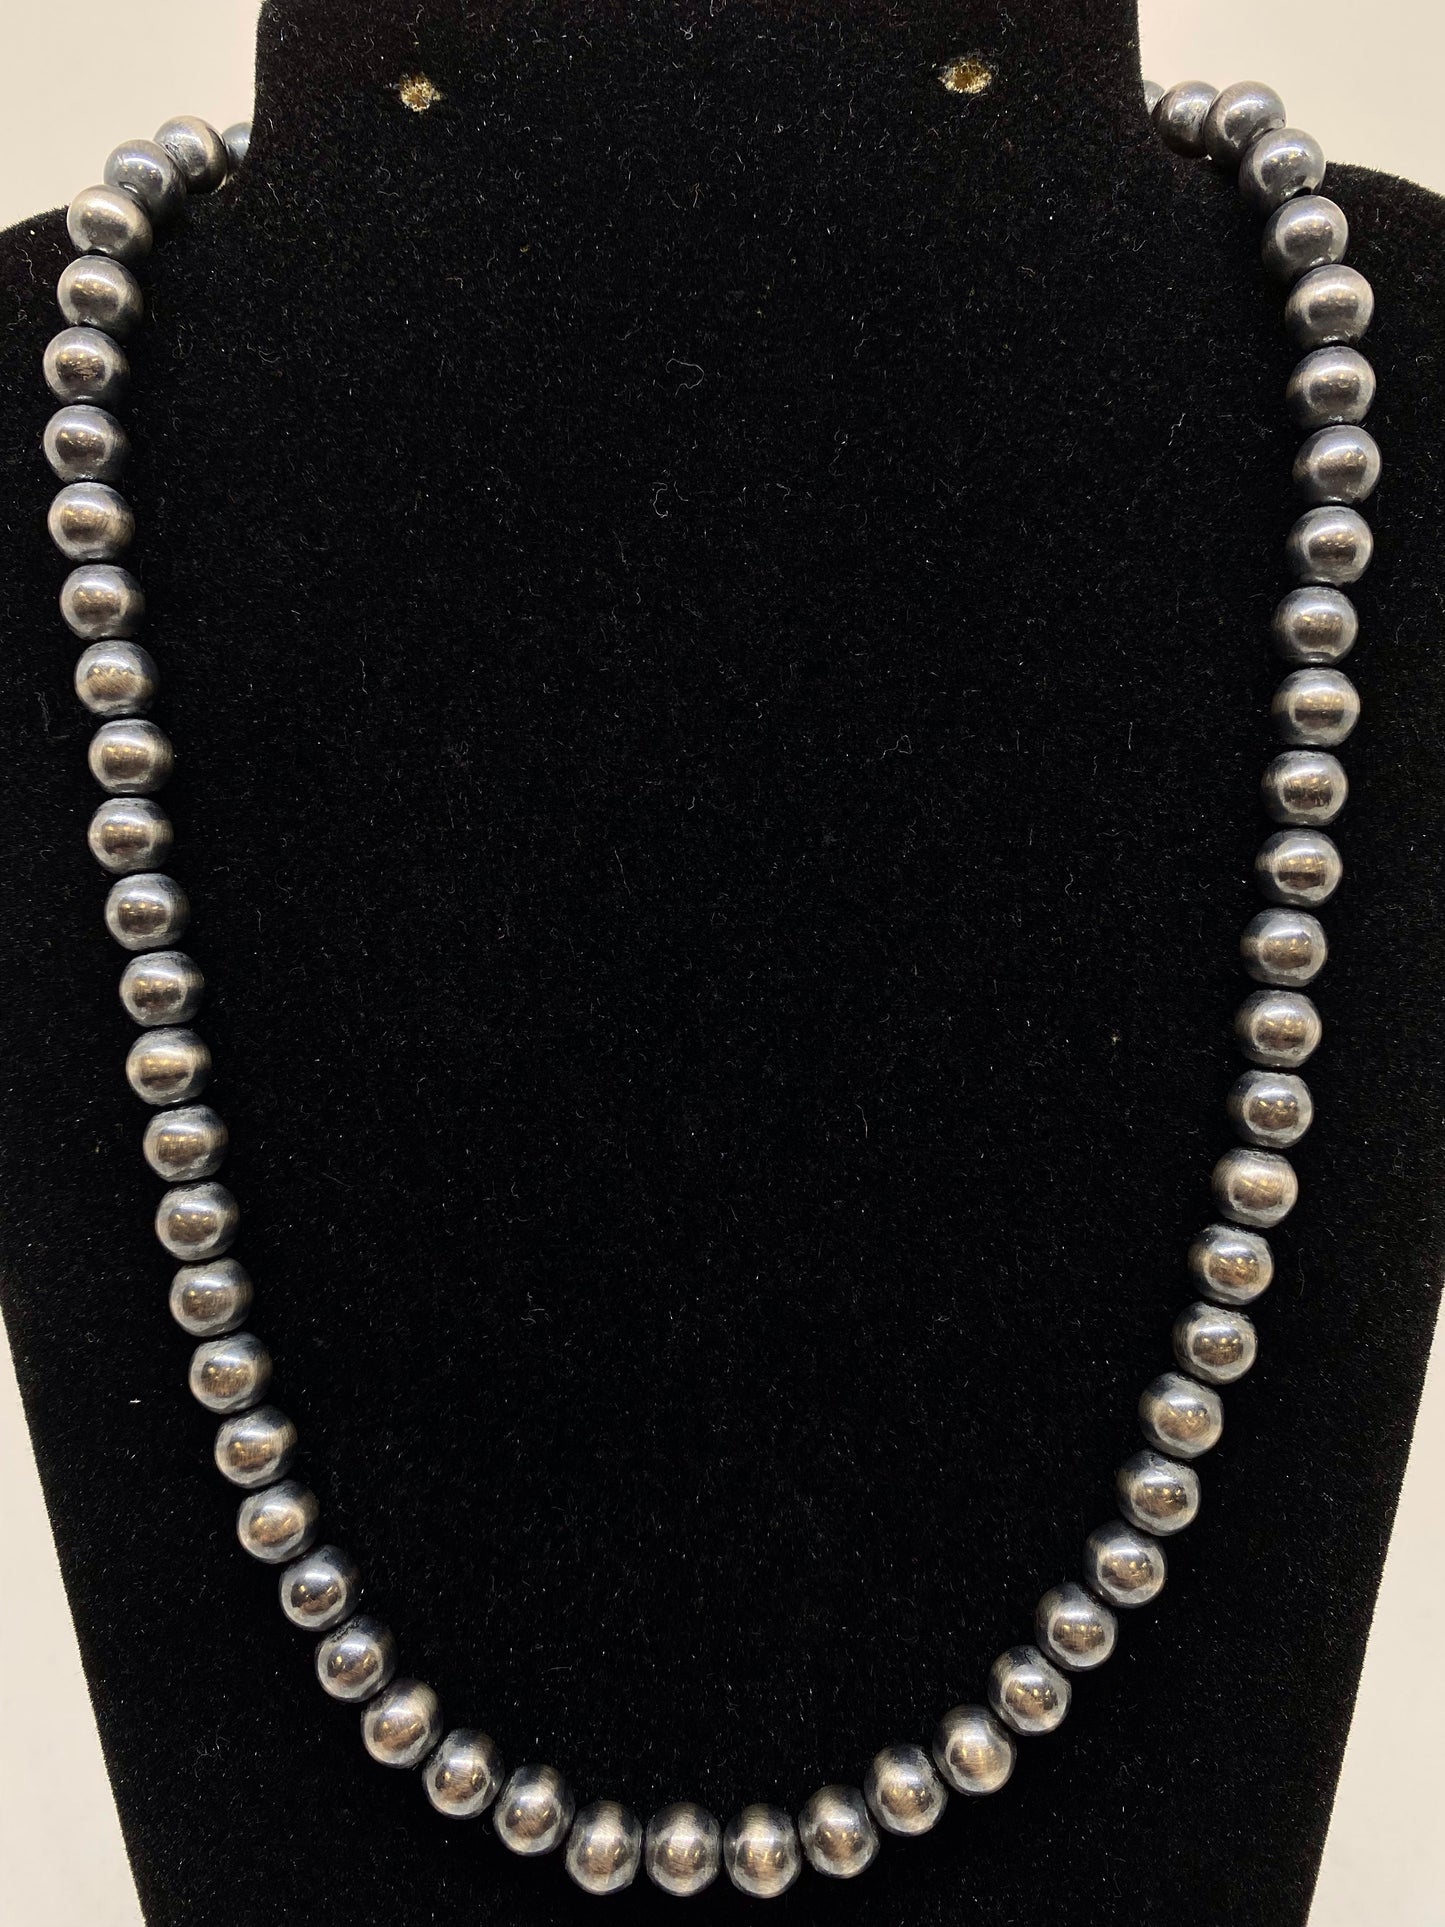 The Tonia Pearls